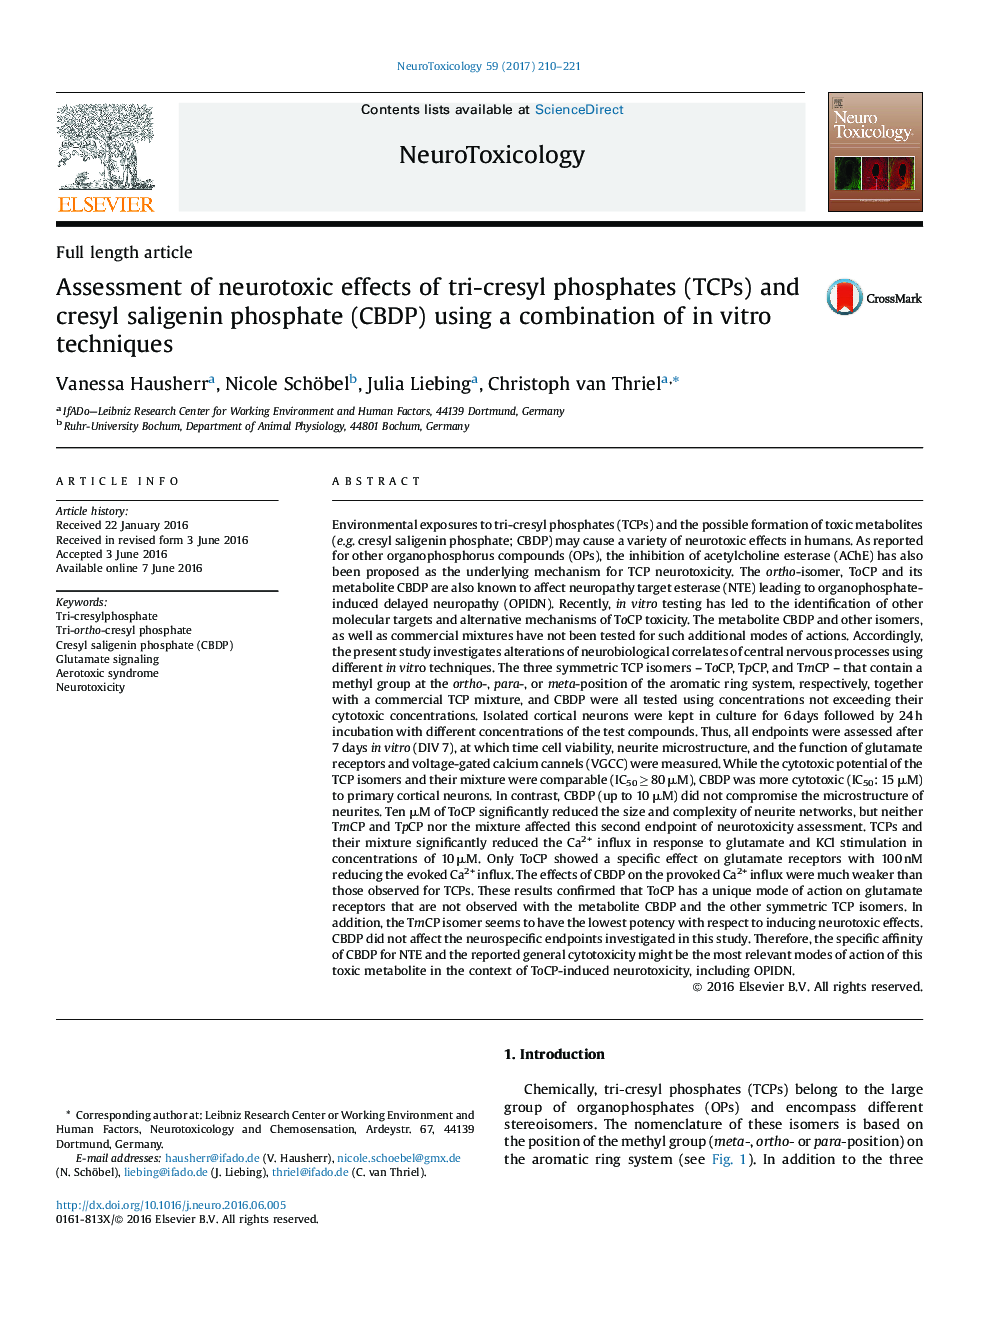 Assessment of neurotoxic effects of tri-cresyl phosphates (TCPs) and cresyl saligenin phosphate (CBDP) using a combination of in vitro techniques